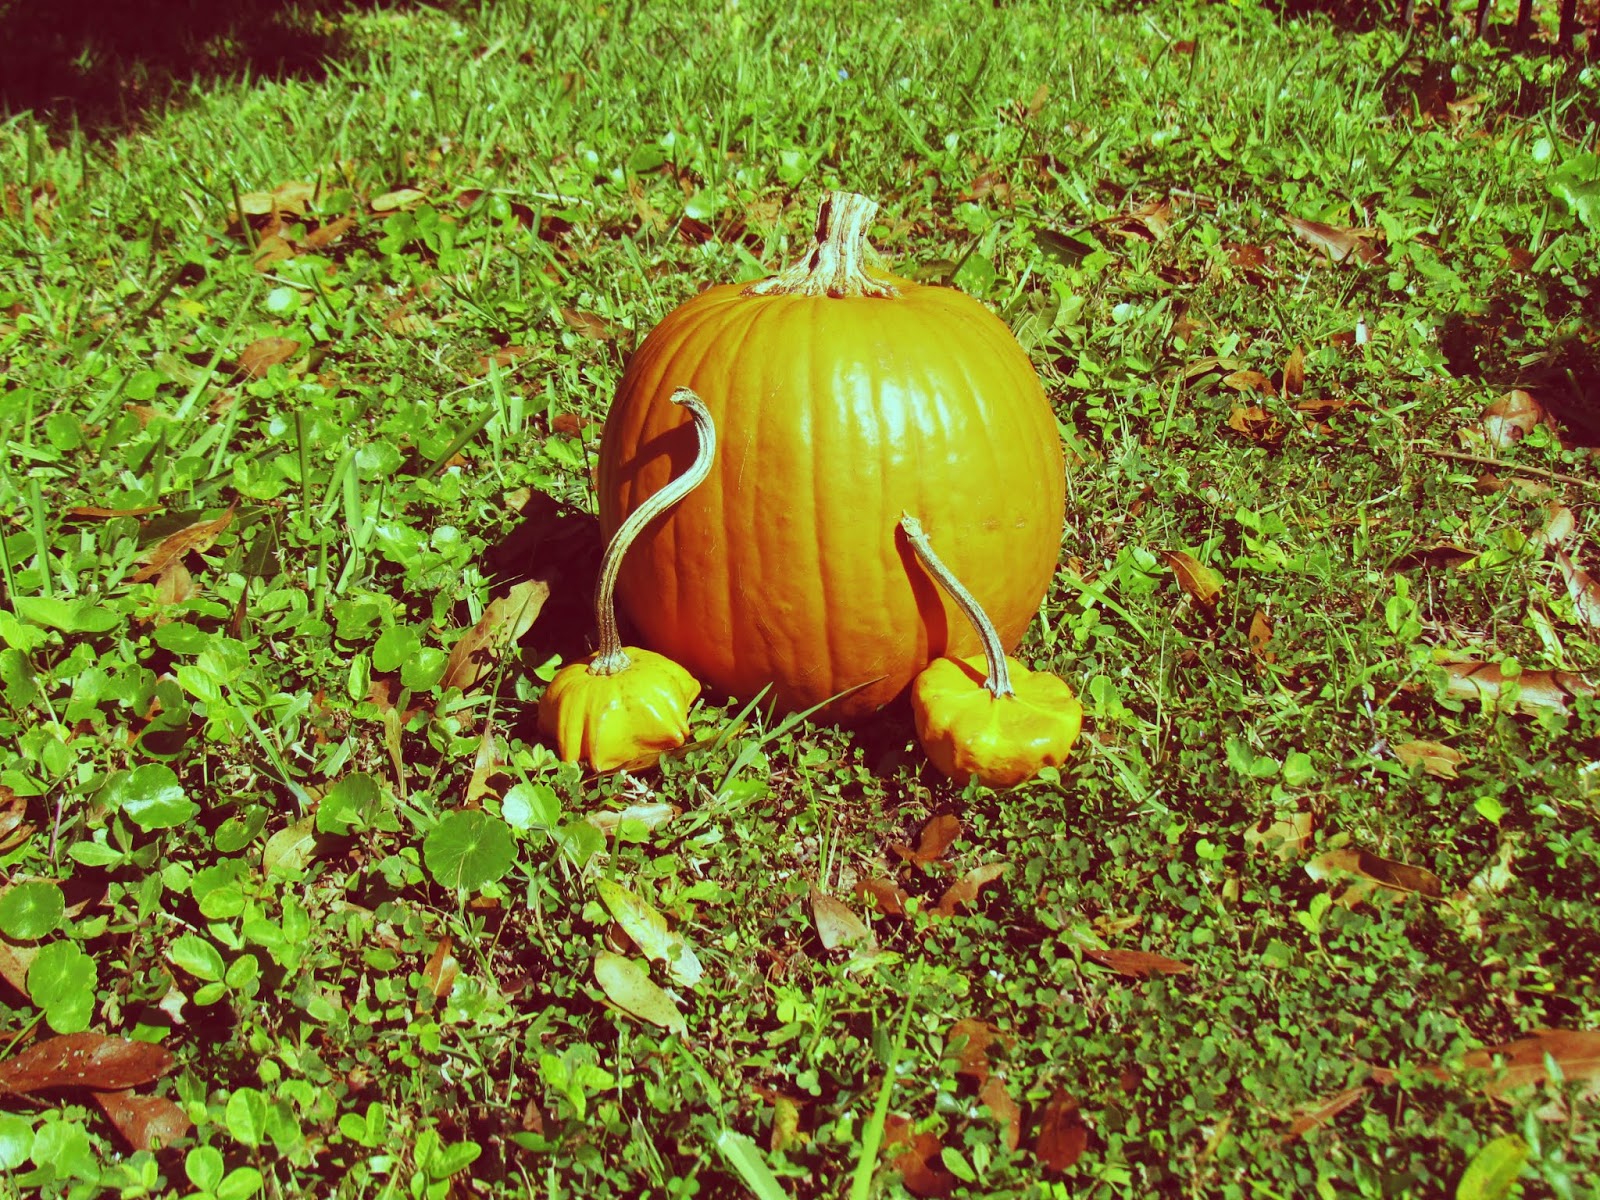 A homemade pumpkin patch in the grass and clovers of Florida living